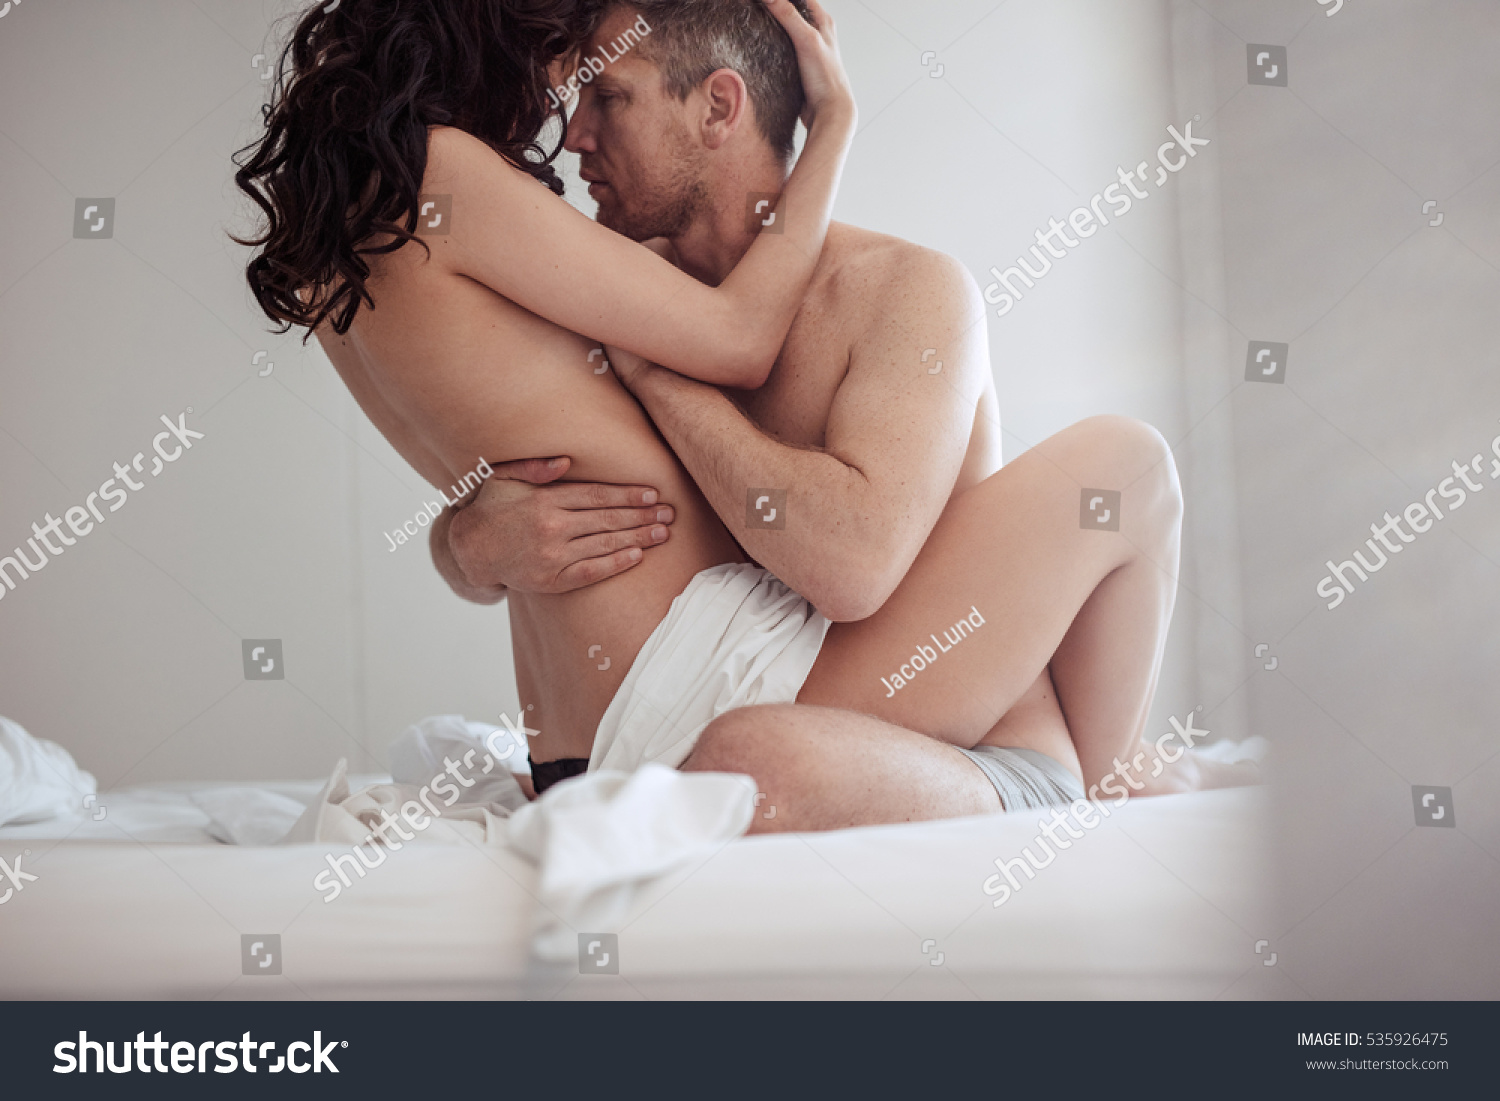 Pictures Of Couple Having Sex 105